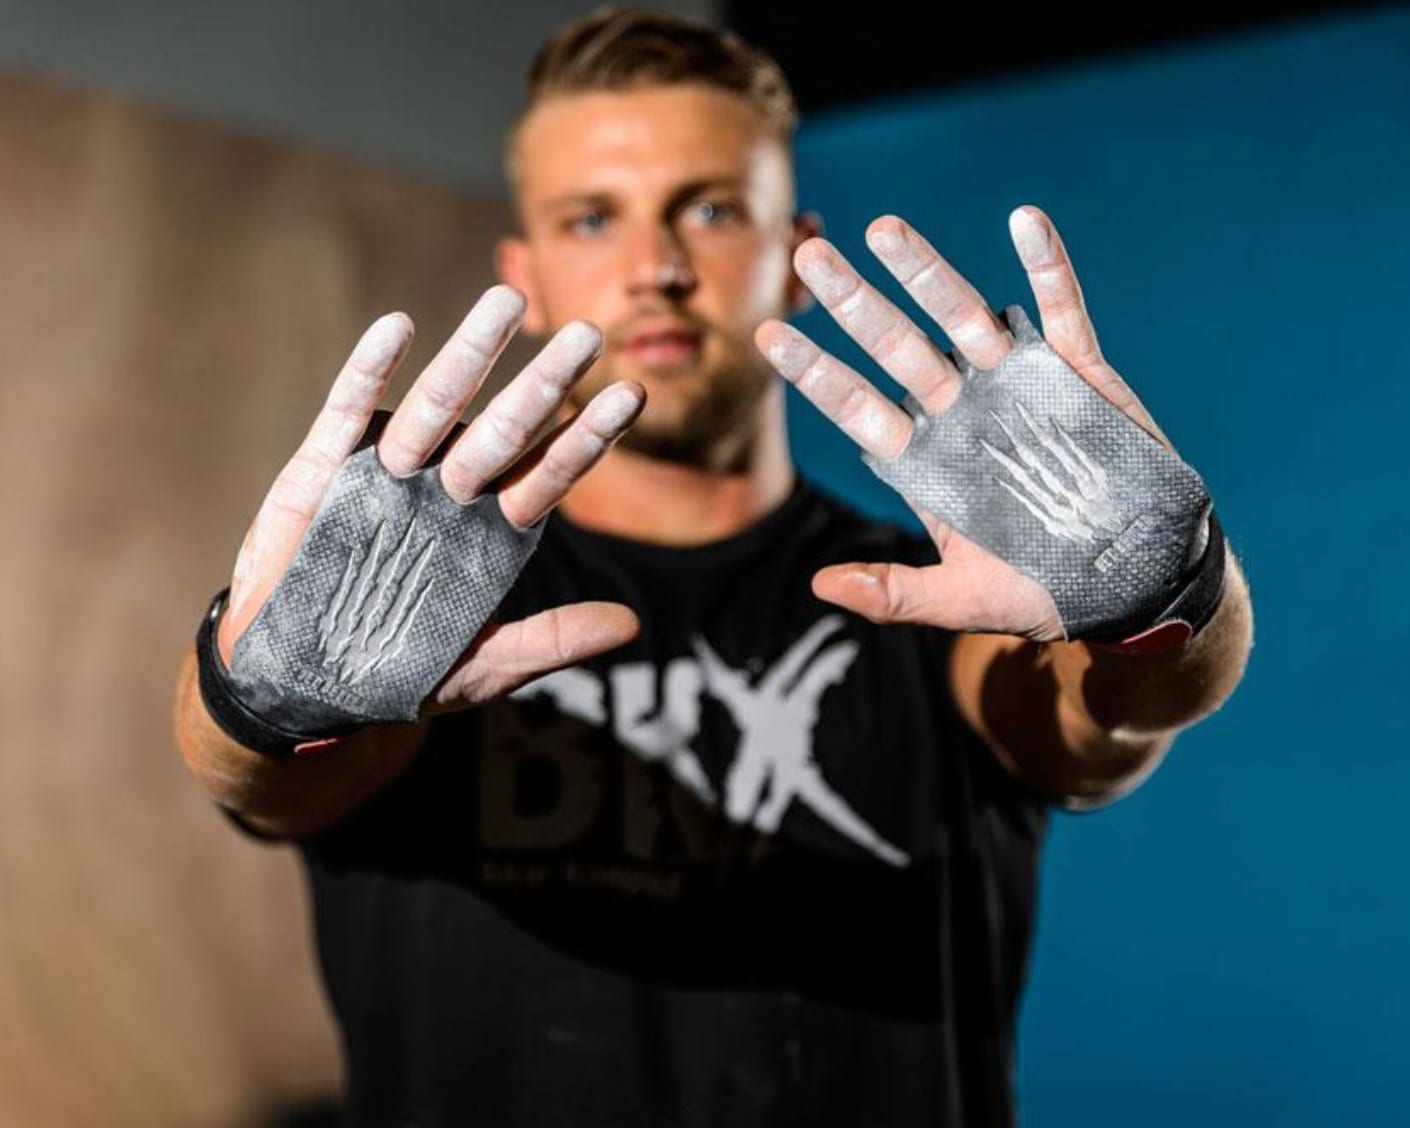 Weight Lifting Comfort & Support-Hand Protection from Rips & Blisters. Pull-ups Bear KompleX 3 & 2 Hole Carbon Hand Grips for Gymnastics & Crossfit Wrist Straps WODs w 